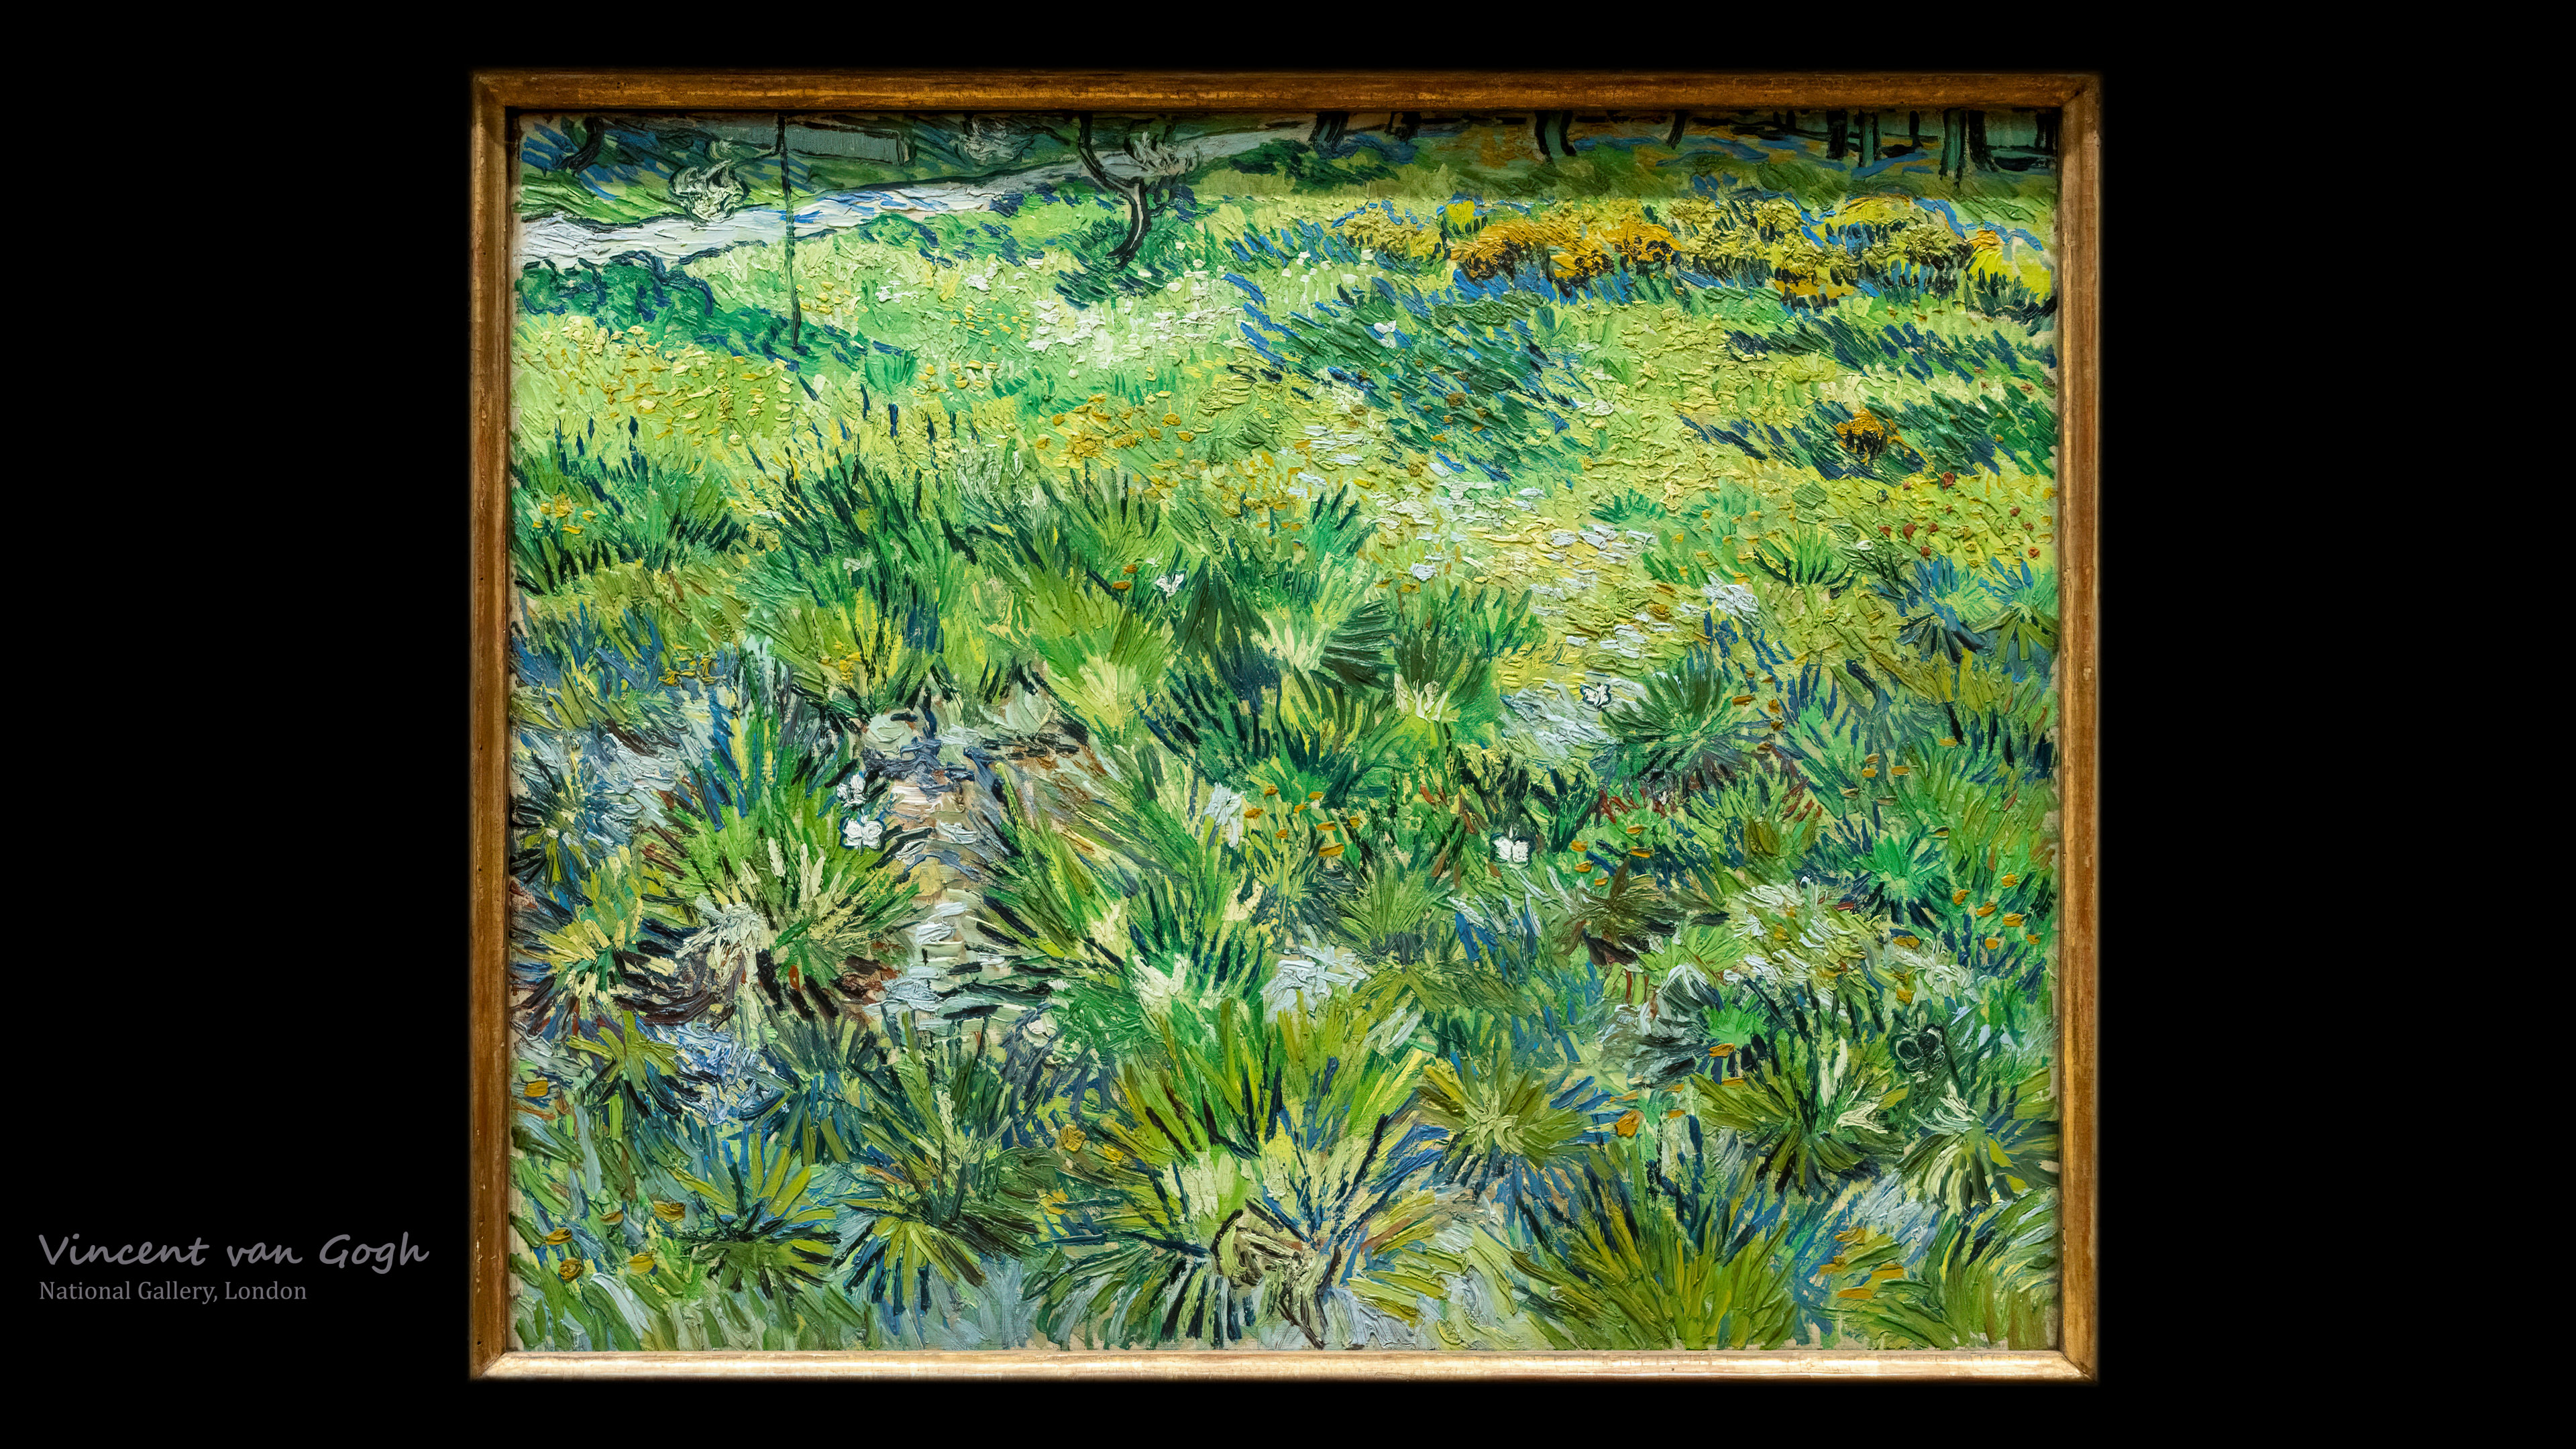 Improve your screen's visual clarity with our high-resolution wallpaper featuring one of the best van Gogh's artwork.